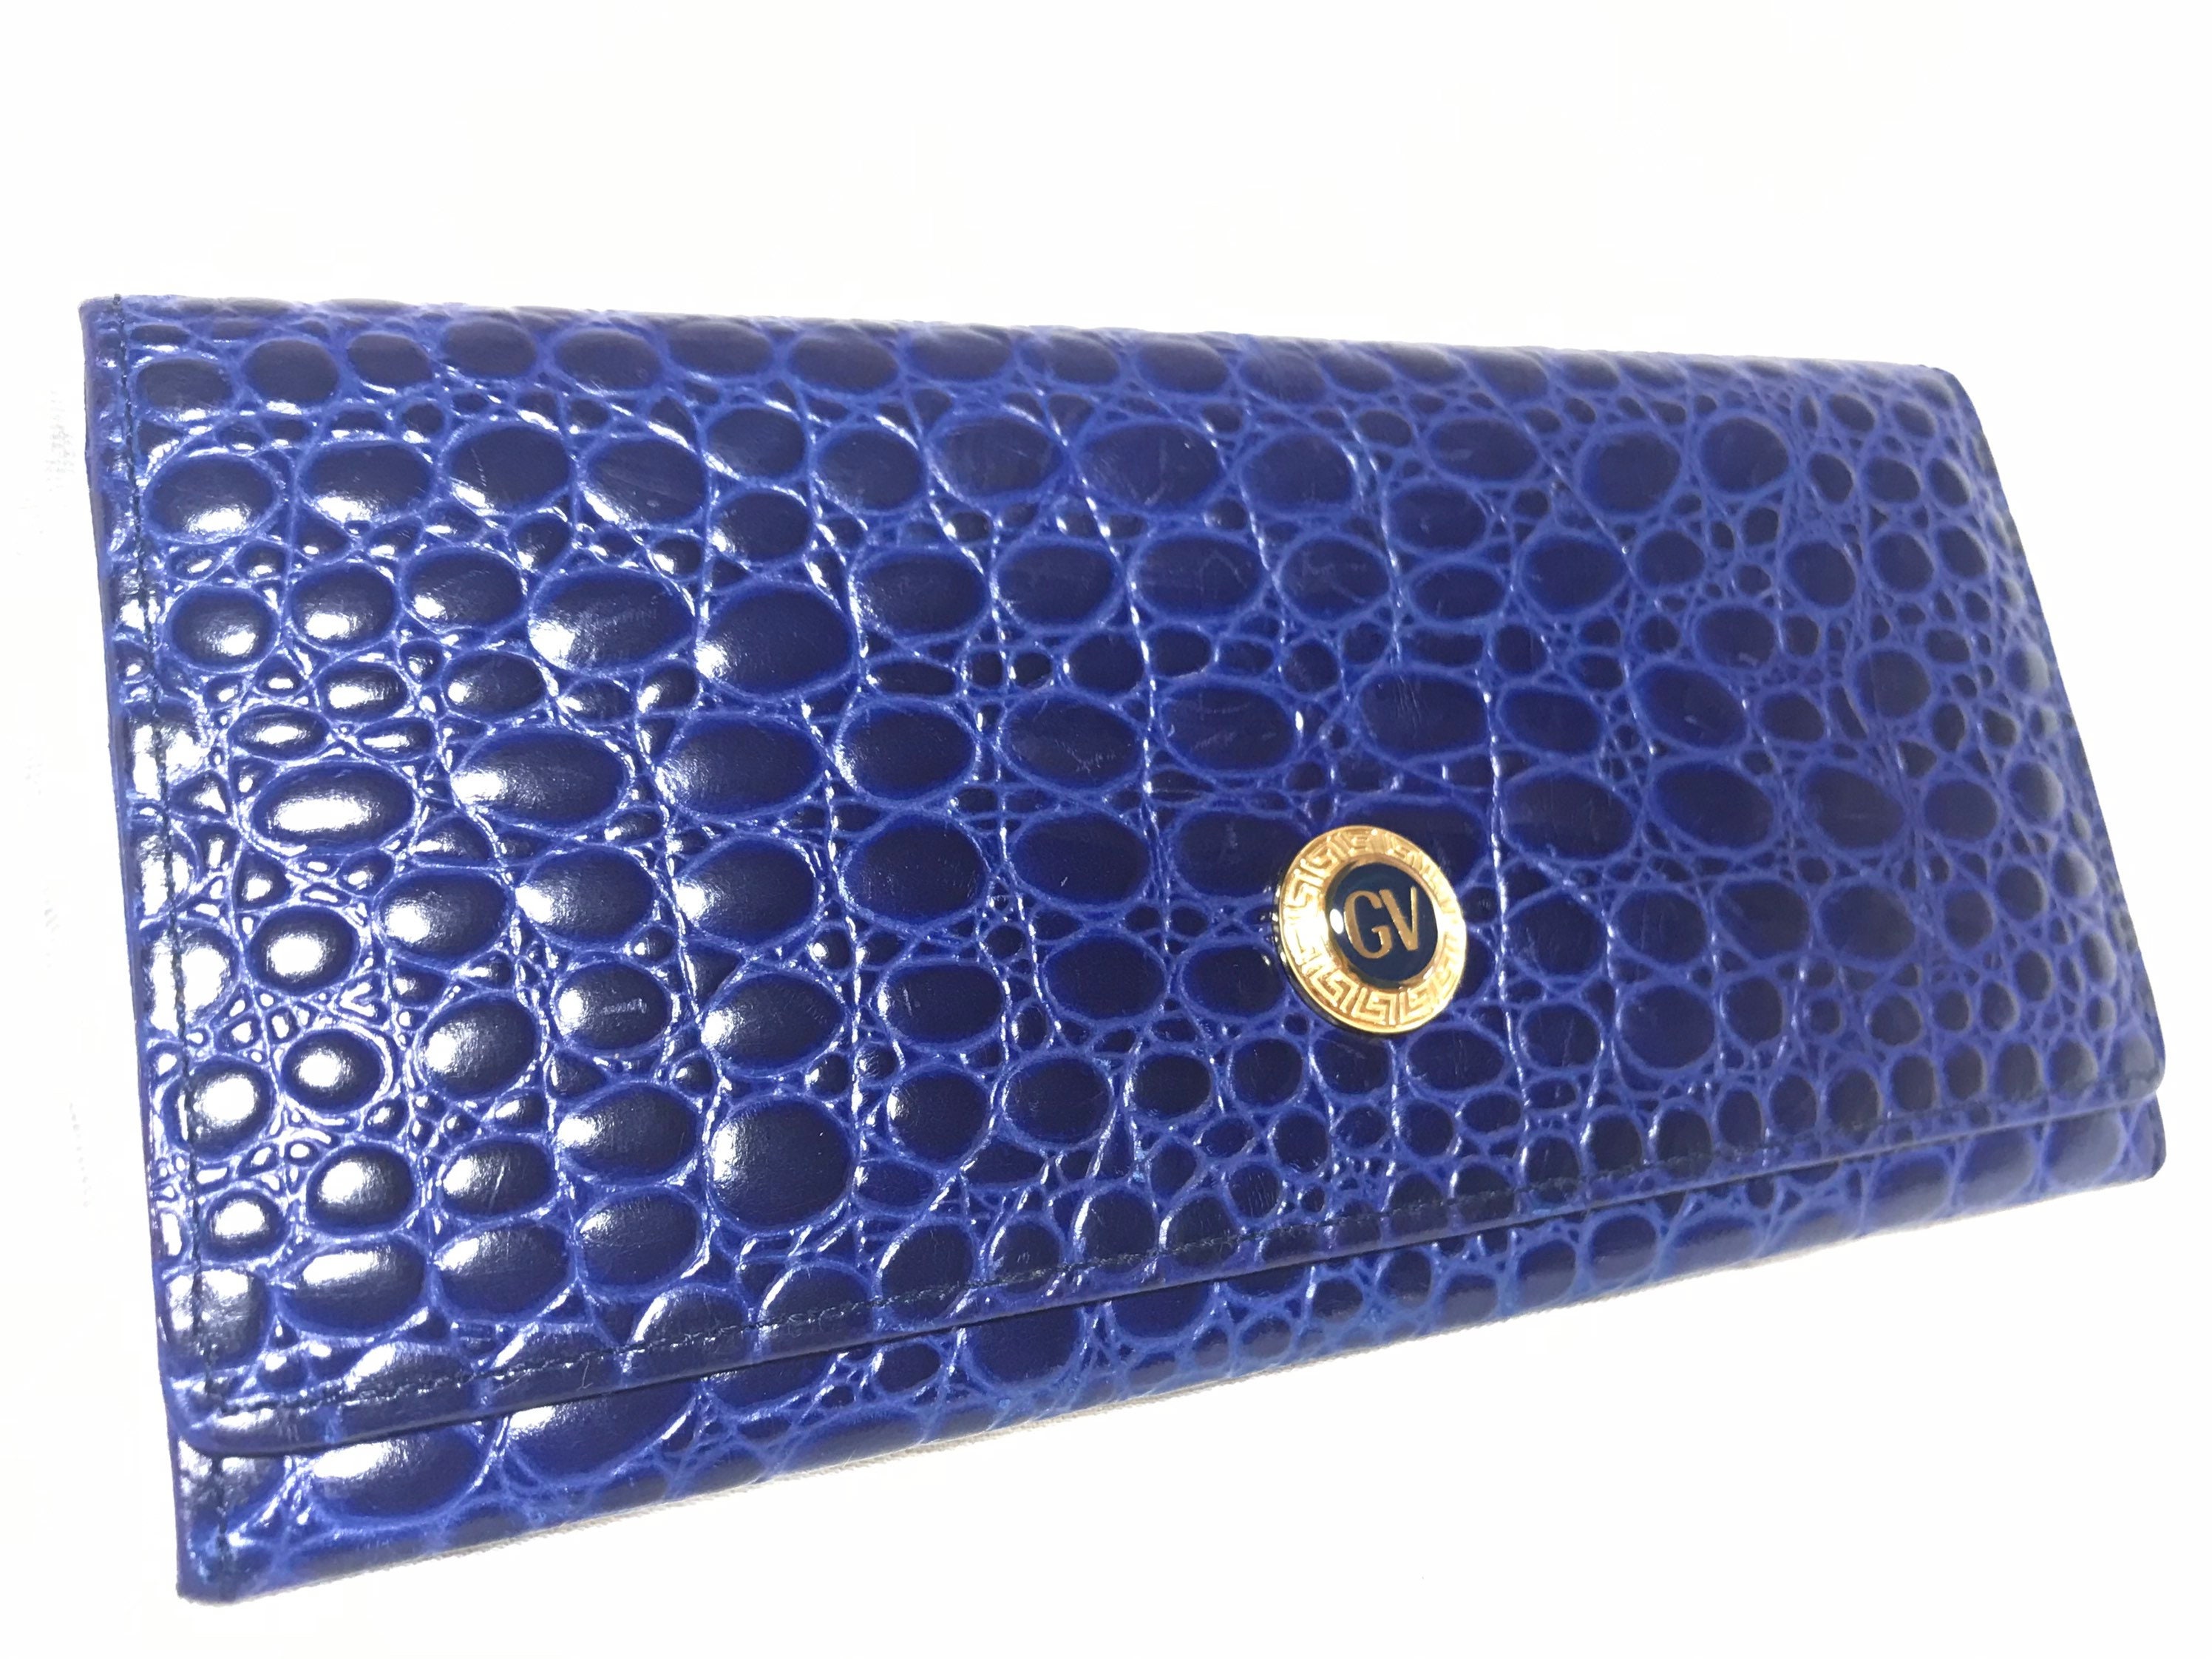 Vintage Gianni Versace croc-embossed leather blue wallet with